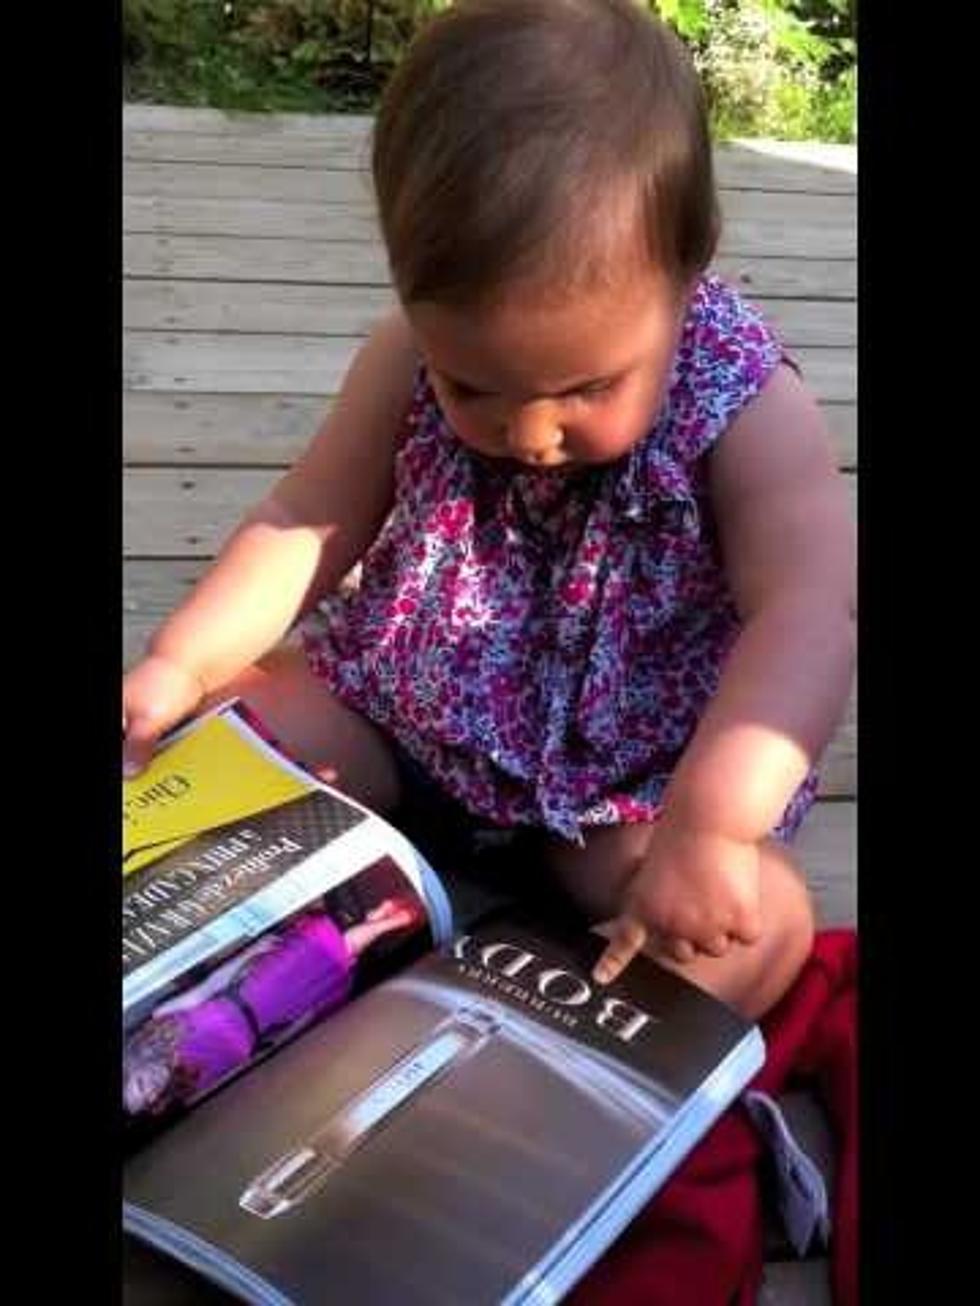 A Baby Thinks Magazine Is A Broken iPad [VIDEO]